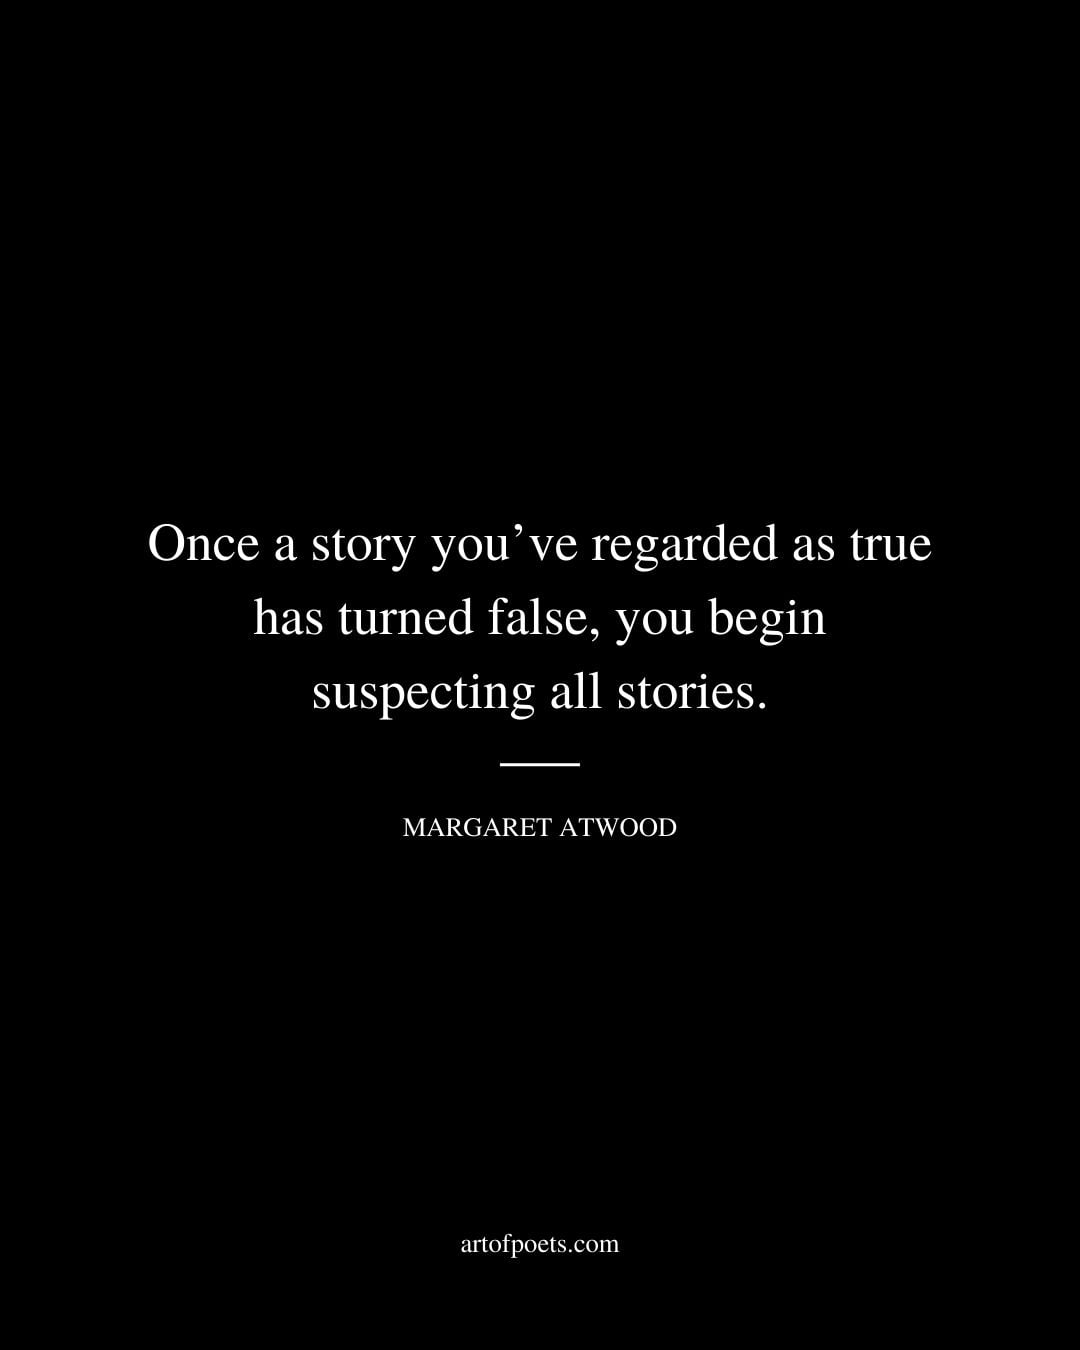 Once a story youve regarded as true has turned false you begin suspecting all stories